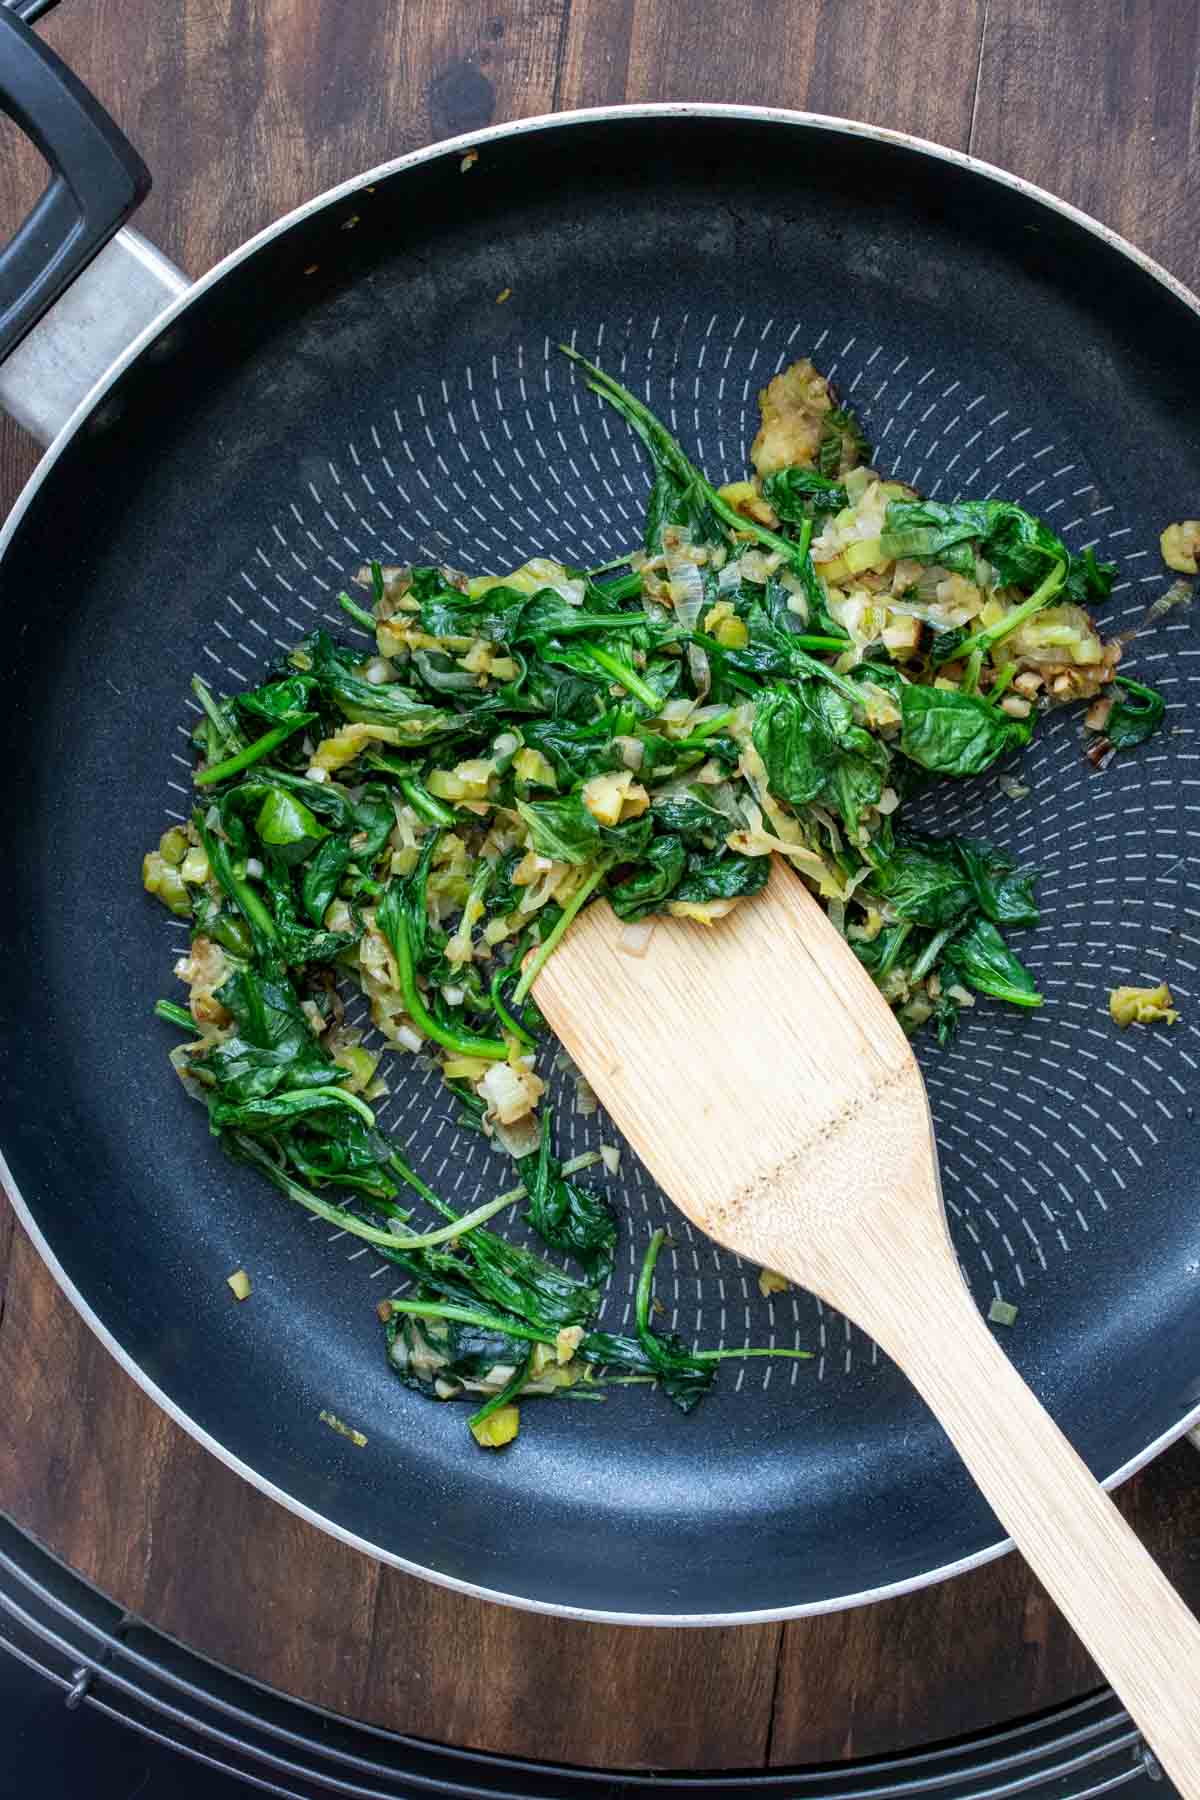 Wooden spoon mixing greens in a pan as they cook.